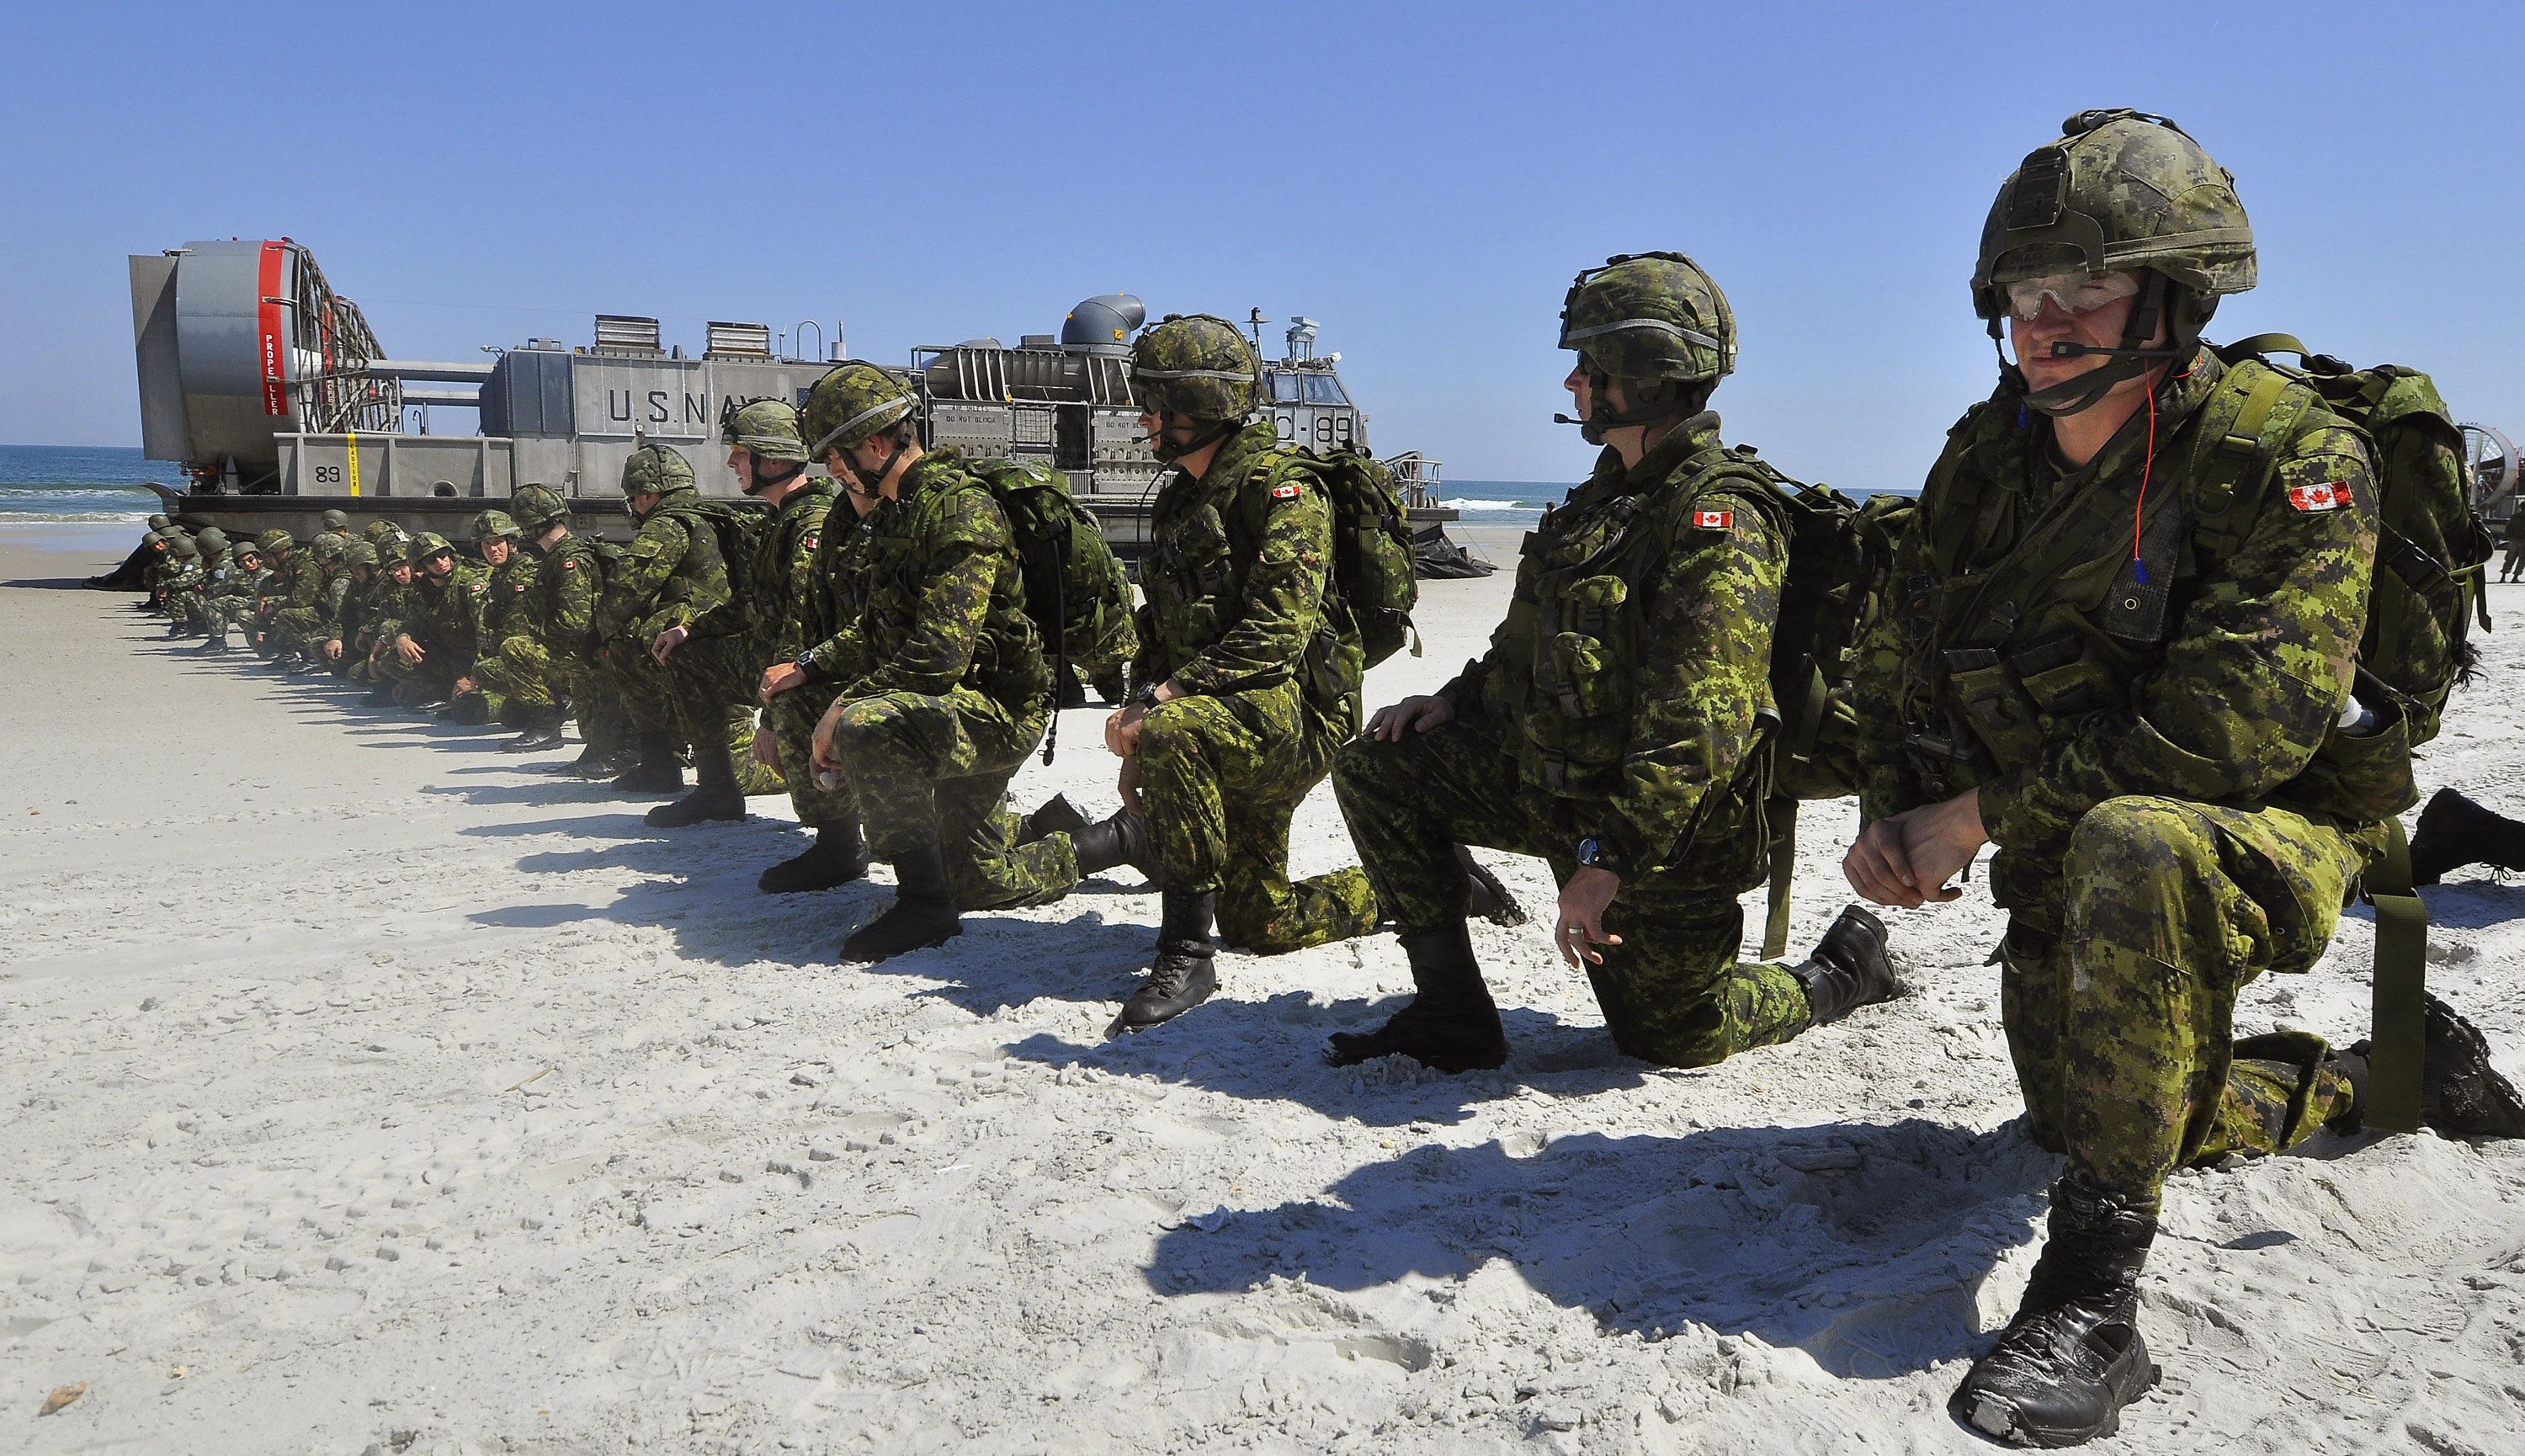 wallpaper- Canadian soldiers, Canada military, Canadian forces